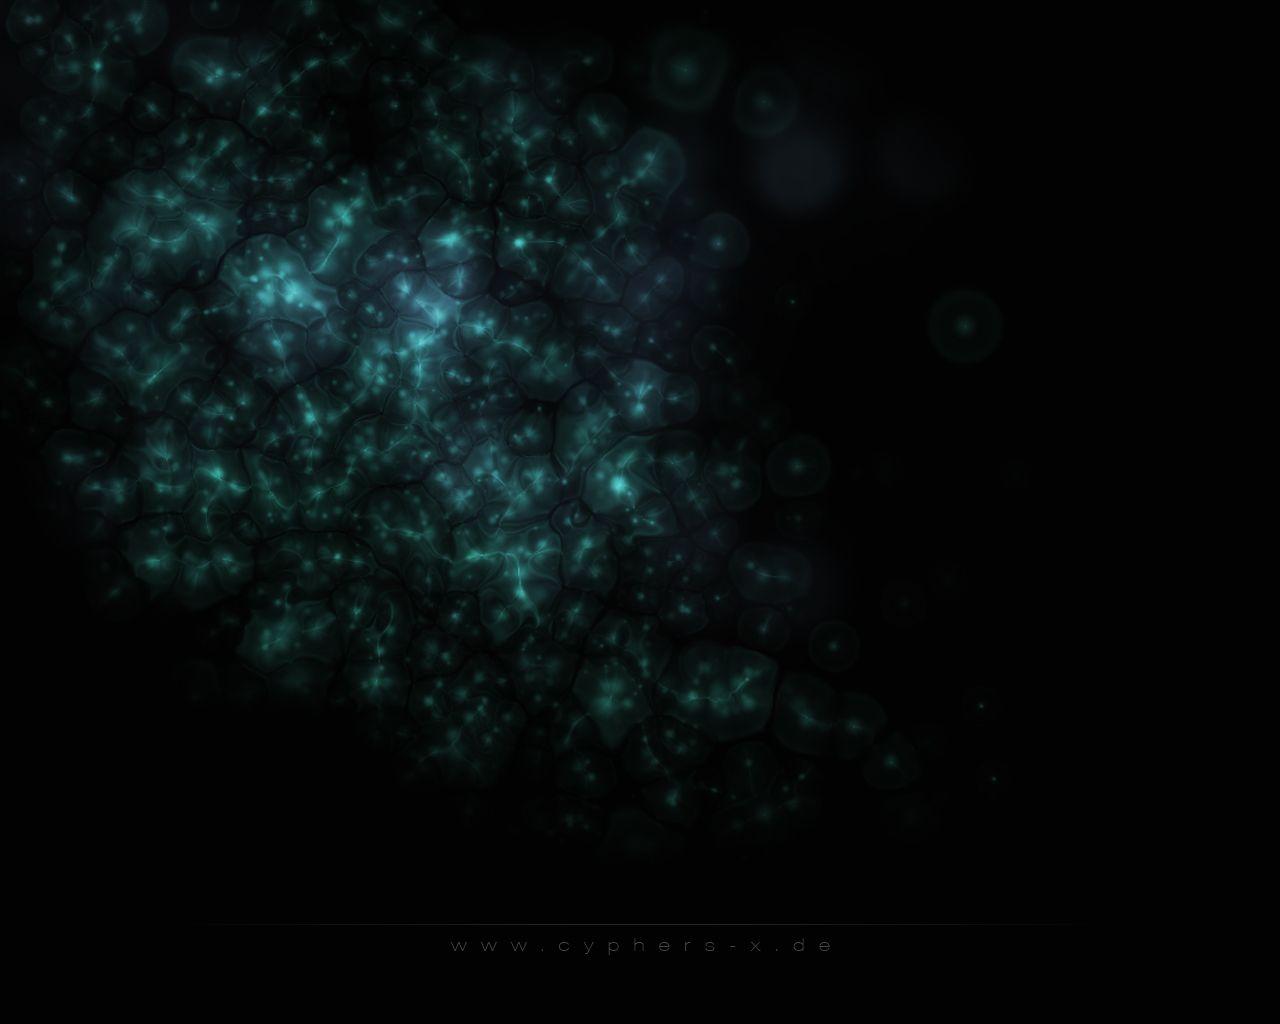 Particles Wallpaper By Cyphers X